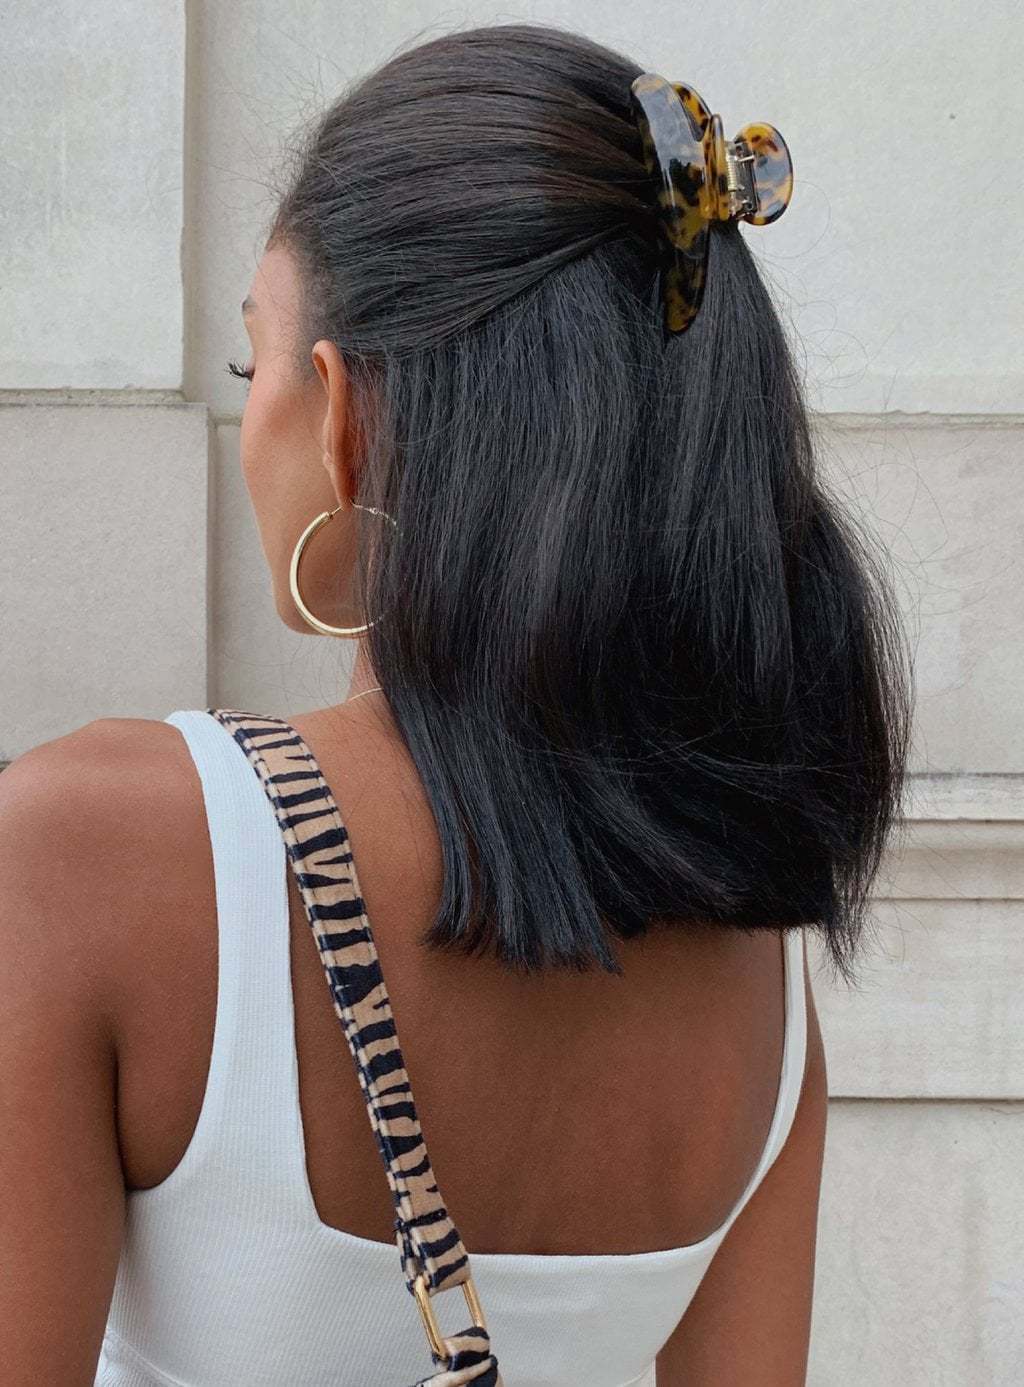 25 DIY Short Hairstyles that You Can Do from the Comfort of your Home